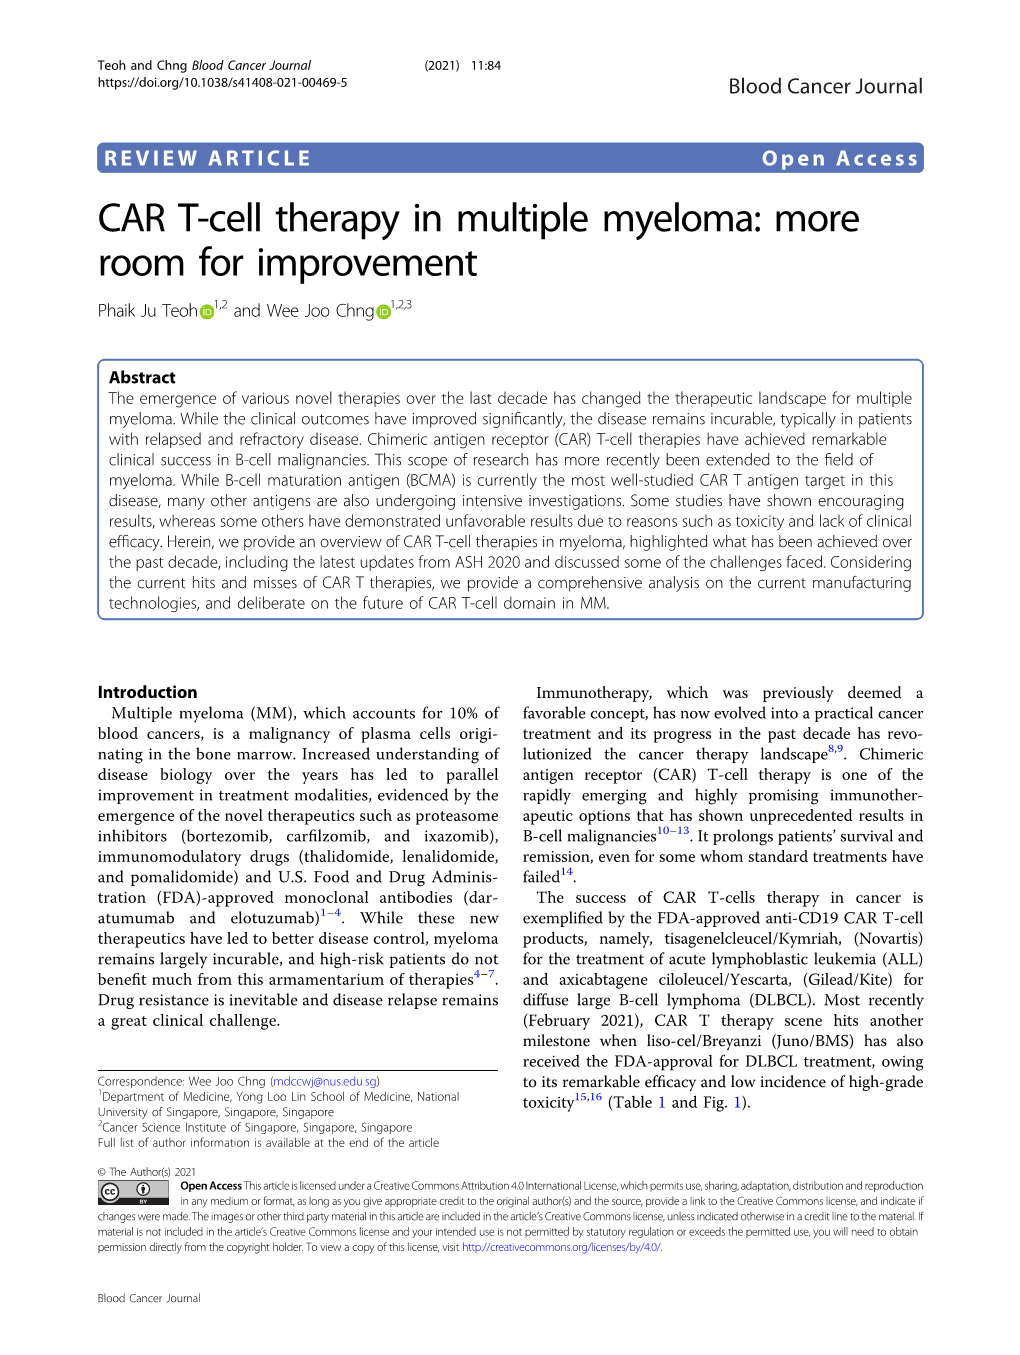 CAR T-Cell Therapy in Multiple Myeloma: More Room for Improvement Phaik Ju Teoh 1,2 and Wee Joo Chng 1,2,3